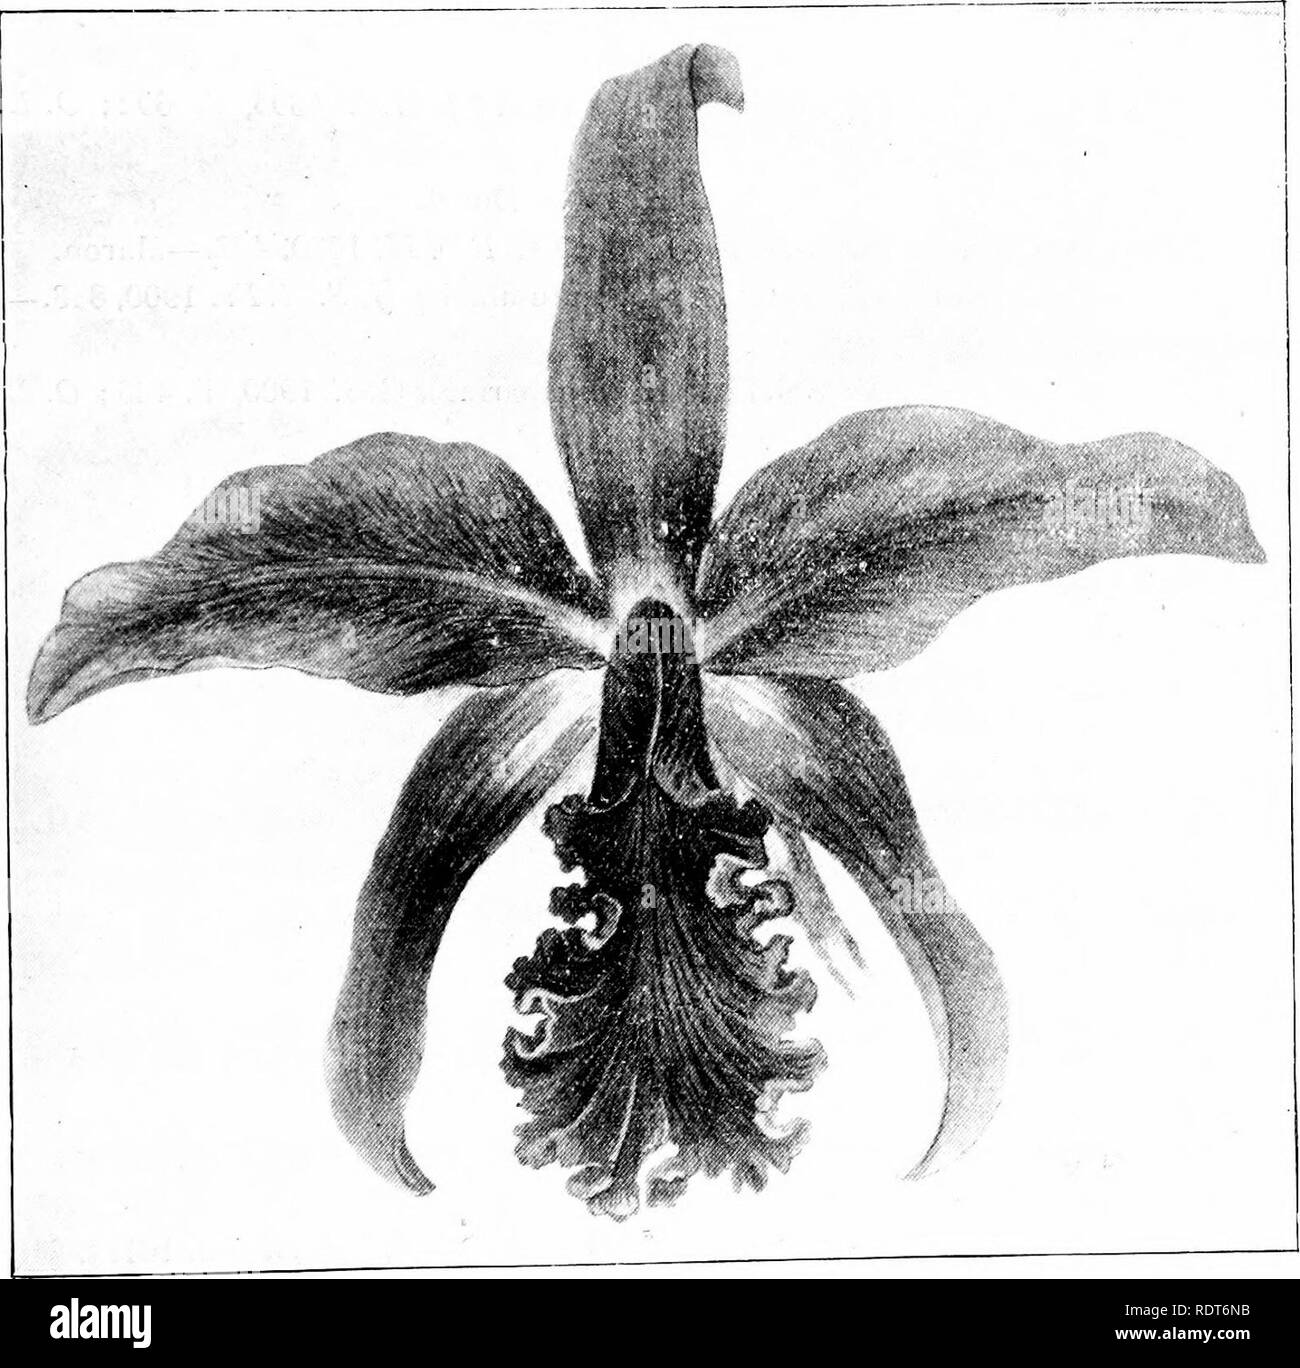 . The orchid stud-book: an enumeration of hybrid orchids of artificial origin, with their parents, raisers, date of first flowering, references to descriptions and figures, and synonymy. With an historical introduction and 120 figures and a chapter on hybridising and raising orchids from seed. Orchids. Part II.l THE ORCHID STUD-BOOK. 99 L.-c. x broomfleldensis (pumila ? ), G.C. 1894, ii. 194, 223, f. 33; J.H. 1894, ii. 170, 171, f. 25 ; G.M. 1894, 519, f.—Wells. L.-c. X Ingrami v. broomfleldensis, O.K. 1S94, 287. L.-c. X Normani, Sand. O. Guide, 278. 51. L.-c. x Clonia (C. Warscewiczii $ x L.- Stock Photo